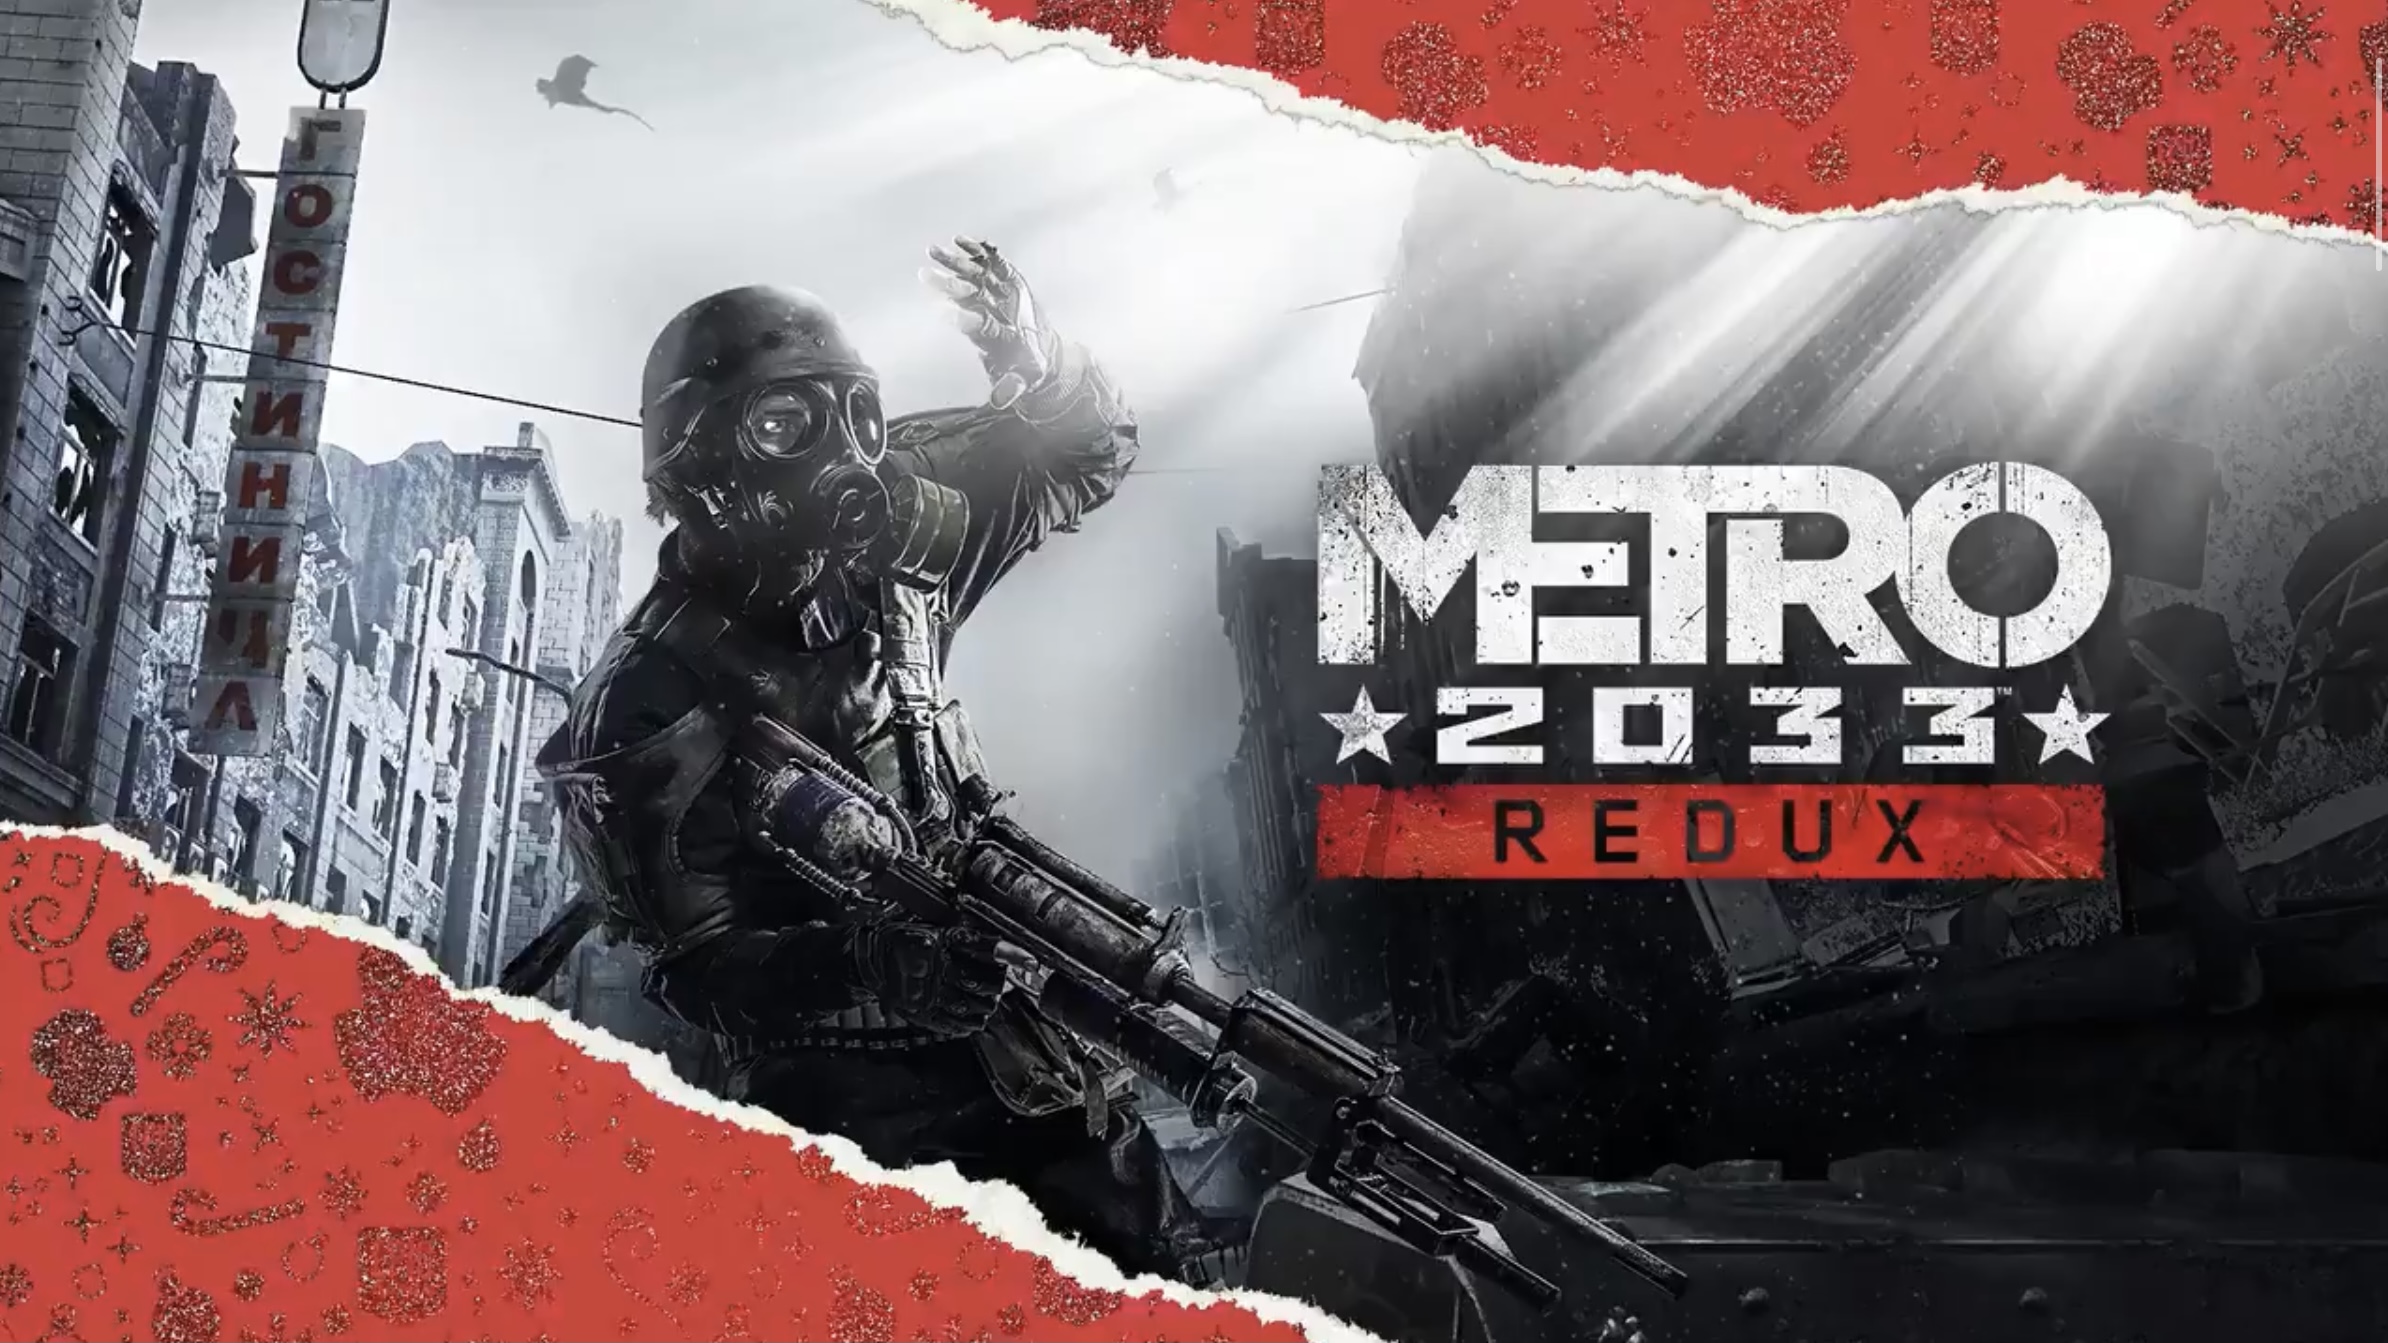 Metro: 2033 Redux is free on the Epic Games Store